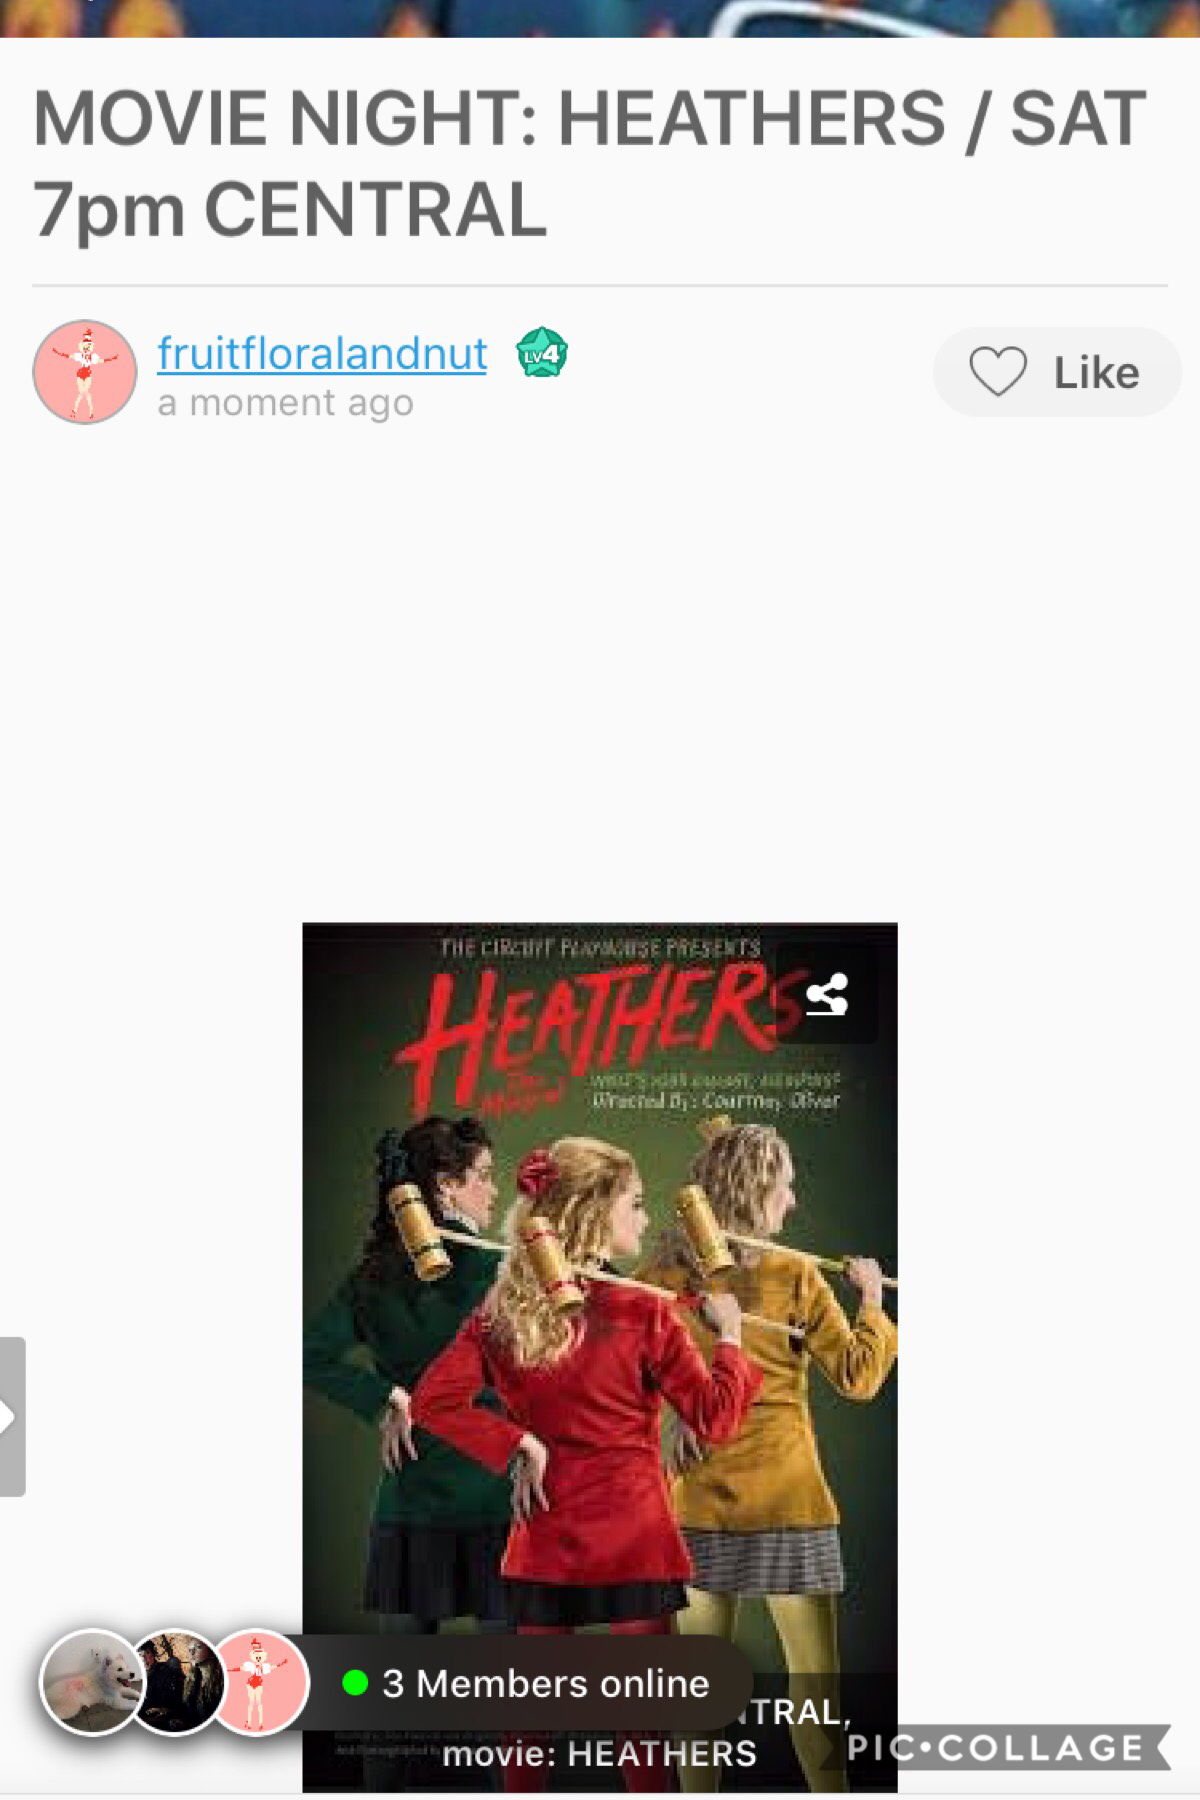 Me, @anobrain, @airborneburrito, and (?) @openthebible r gonna see heathers together on my amino. If yall wanna join pls do. Itl be so fun